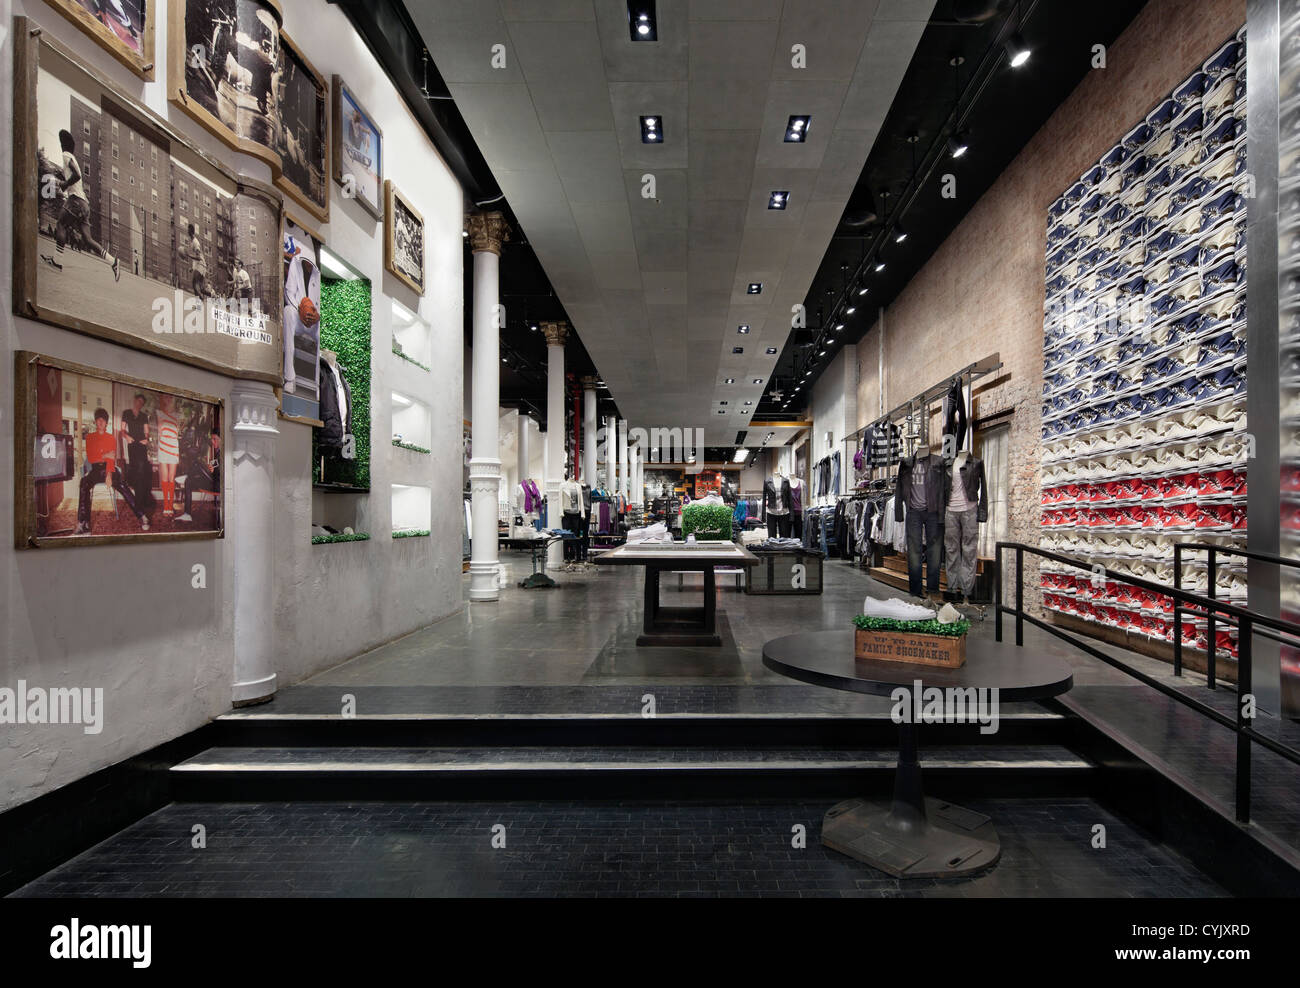 converse flagship store new york city